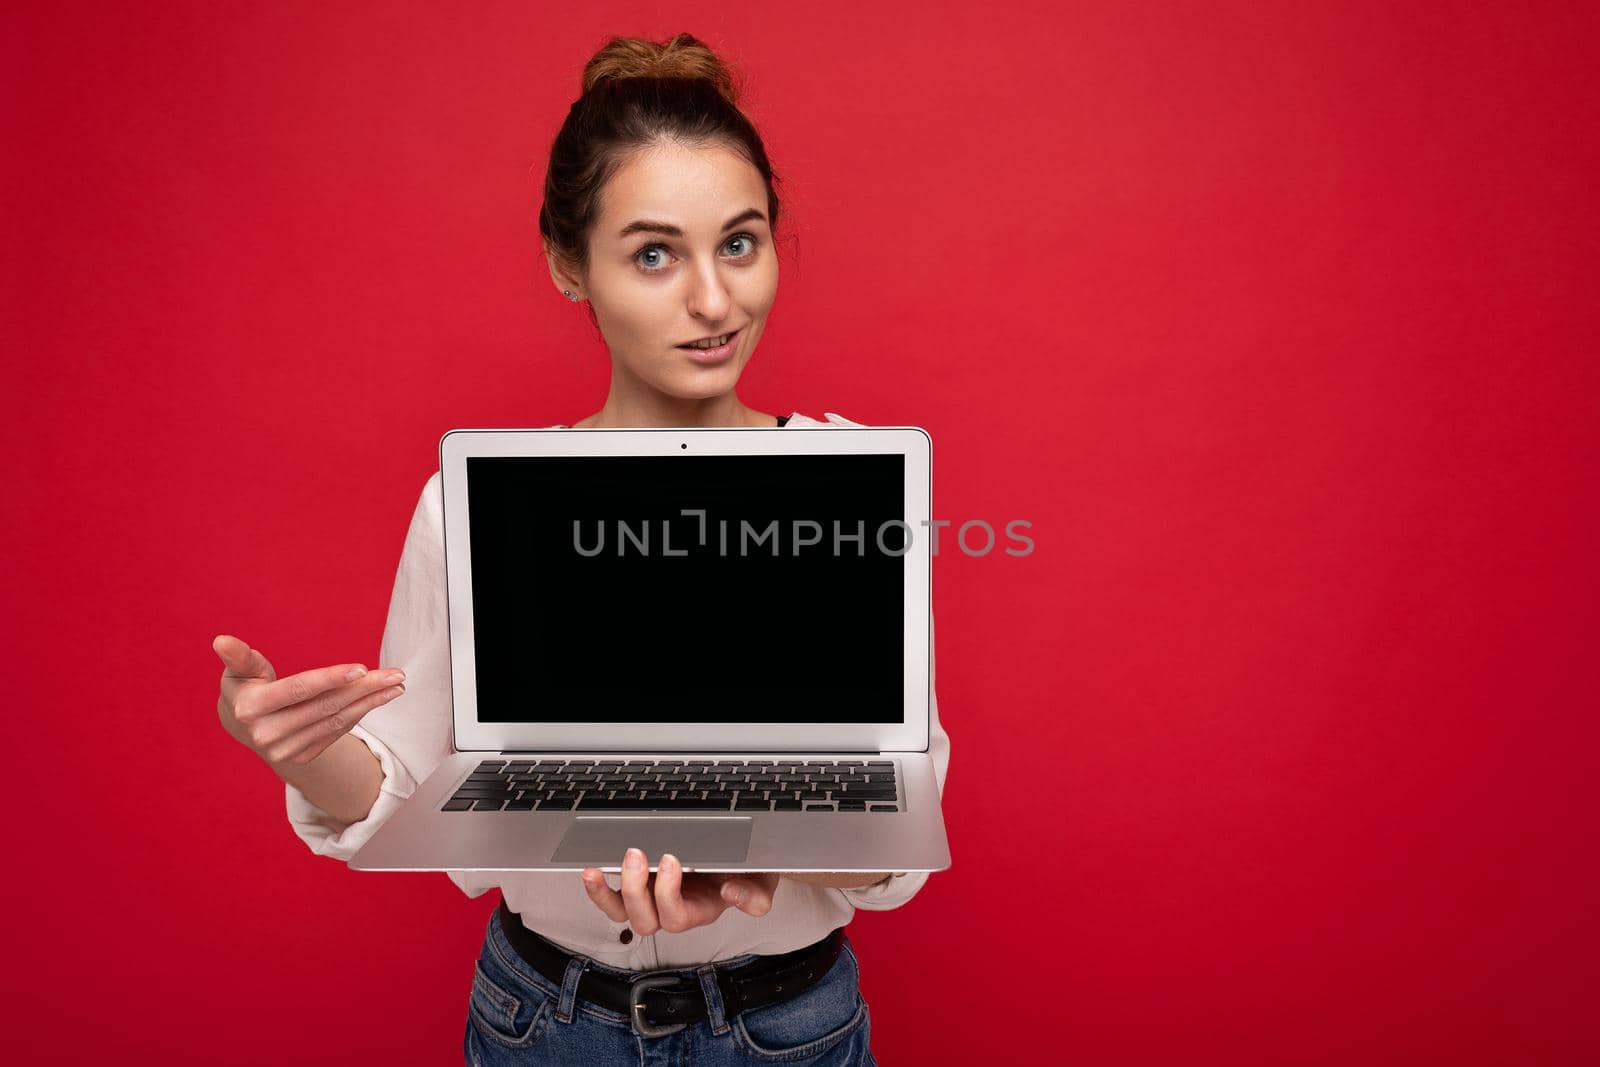 Close-up portrait of Beautiful smiling happy young woman holding computer laptop looking at camera pointing at display wearing casual smart clothes isolated over red wall background.